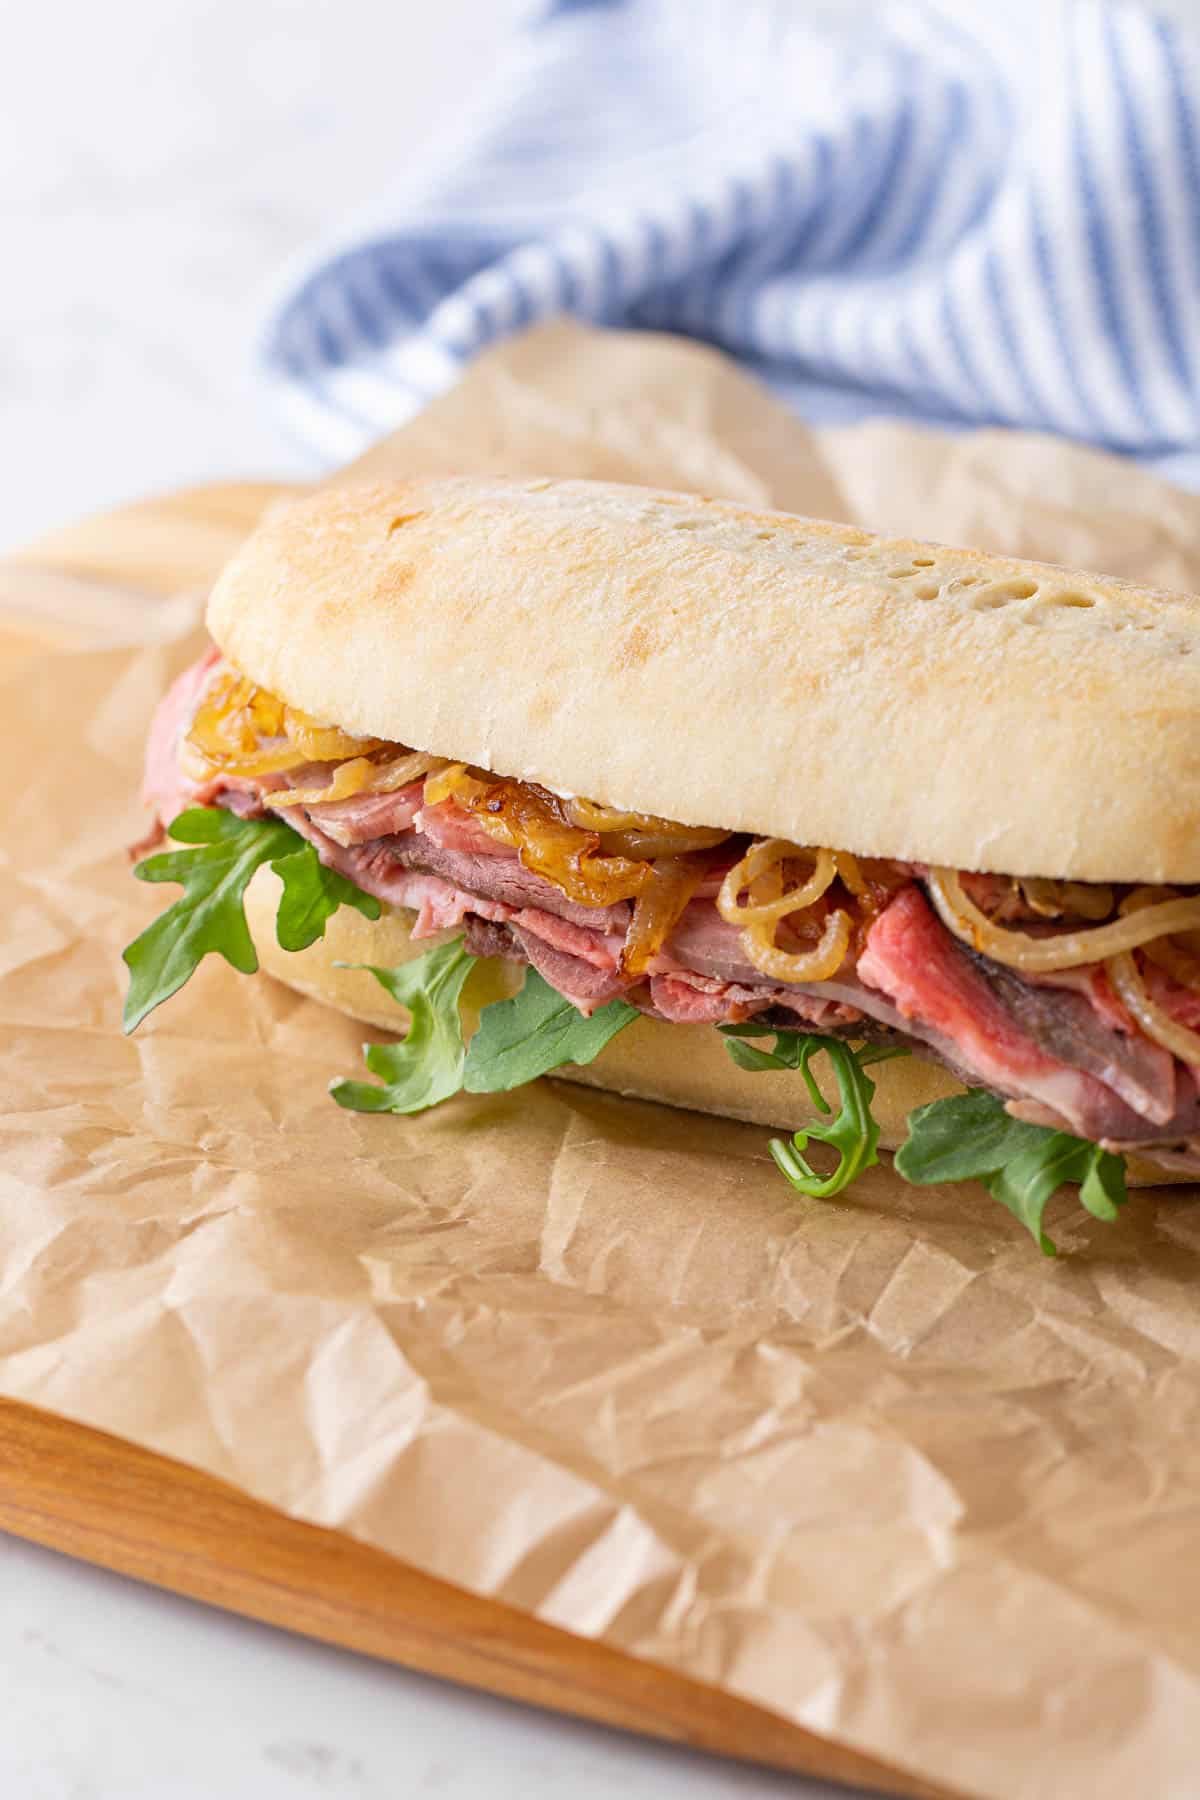 A prime rib sandwich with caramelized onions and arugula.